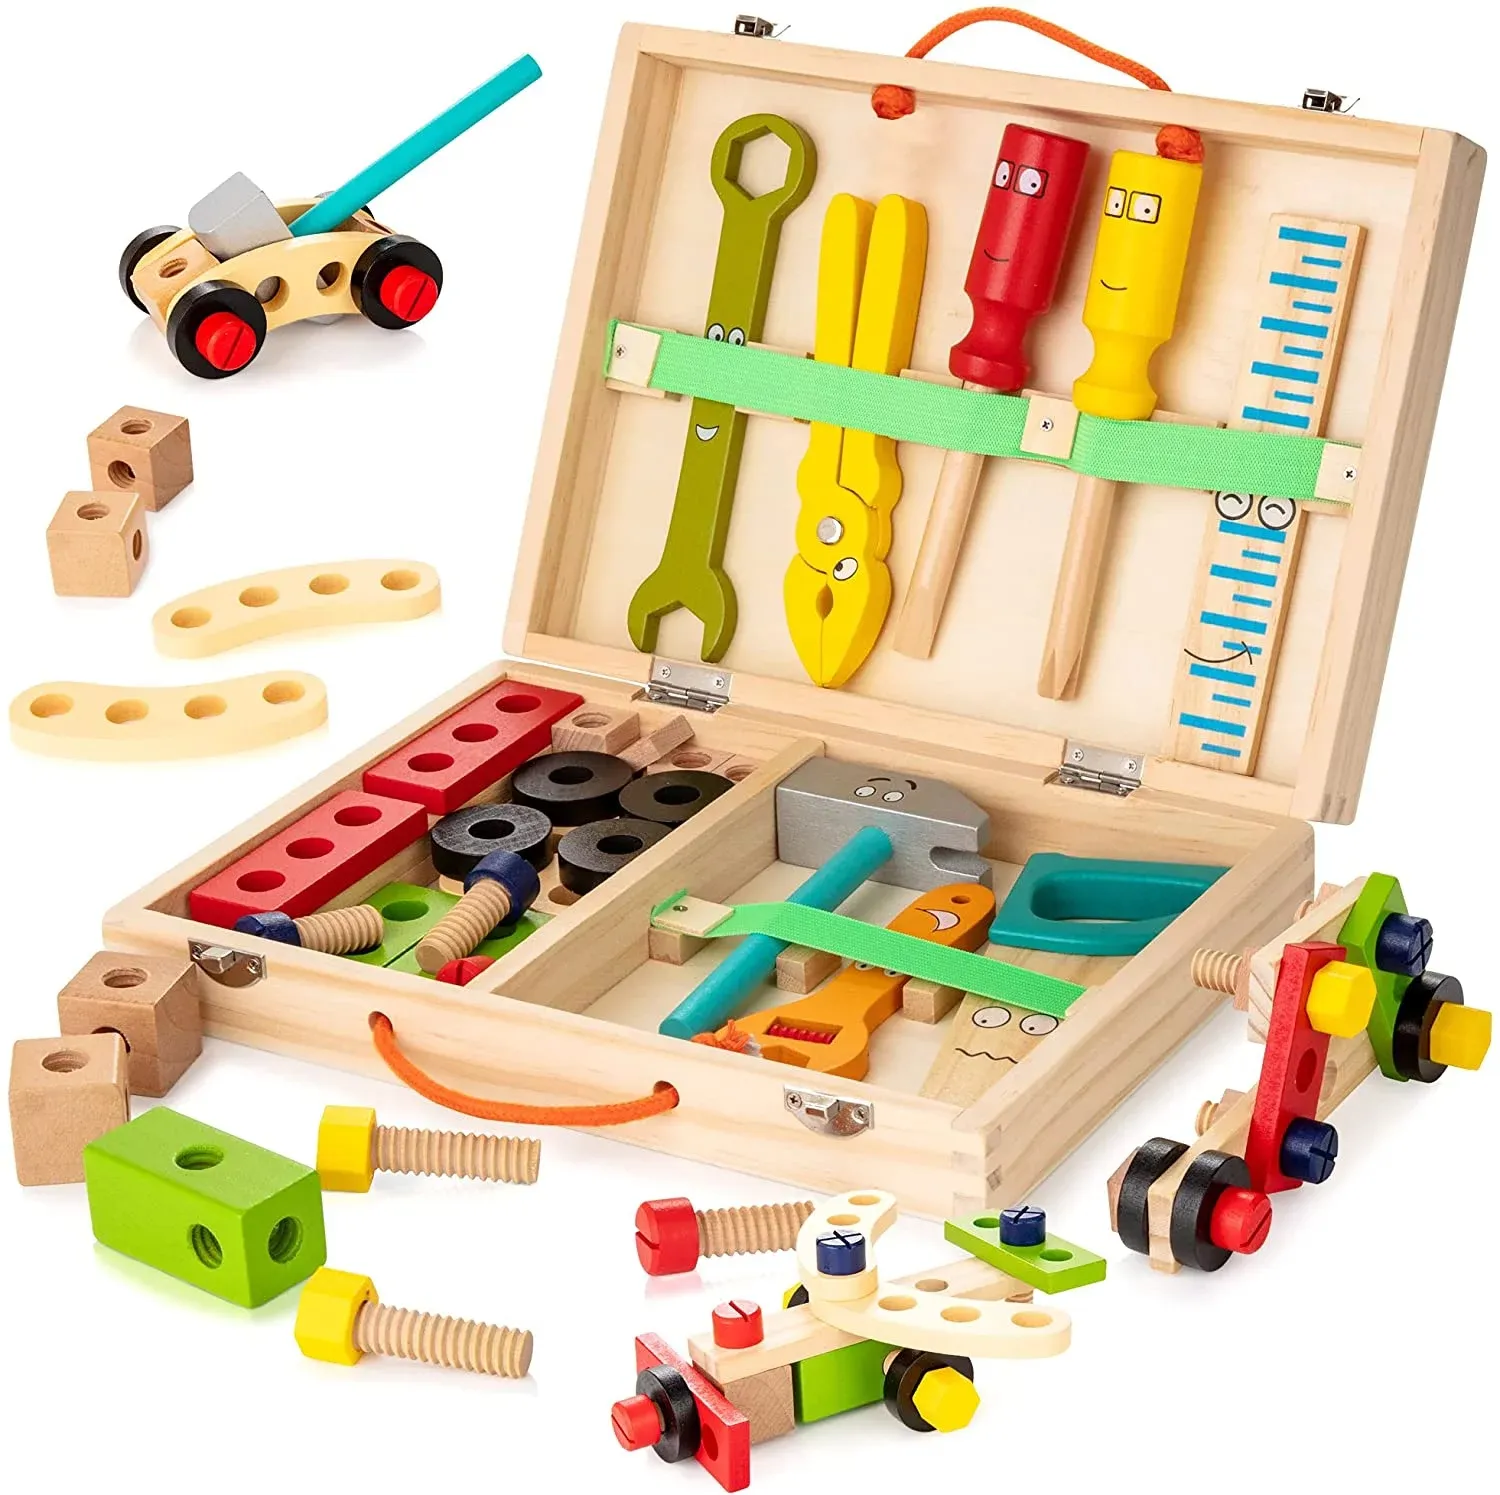 Tool Kit for Kids Wooden Toddler Tools Set Includes Tool Box Montessori Educational Stem Construction Toys for Boys Girls